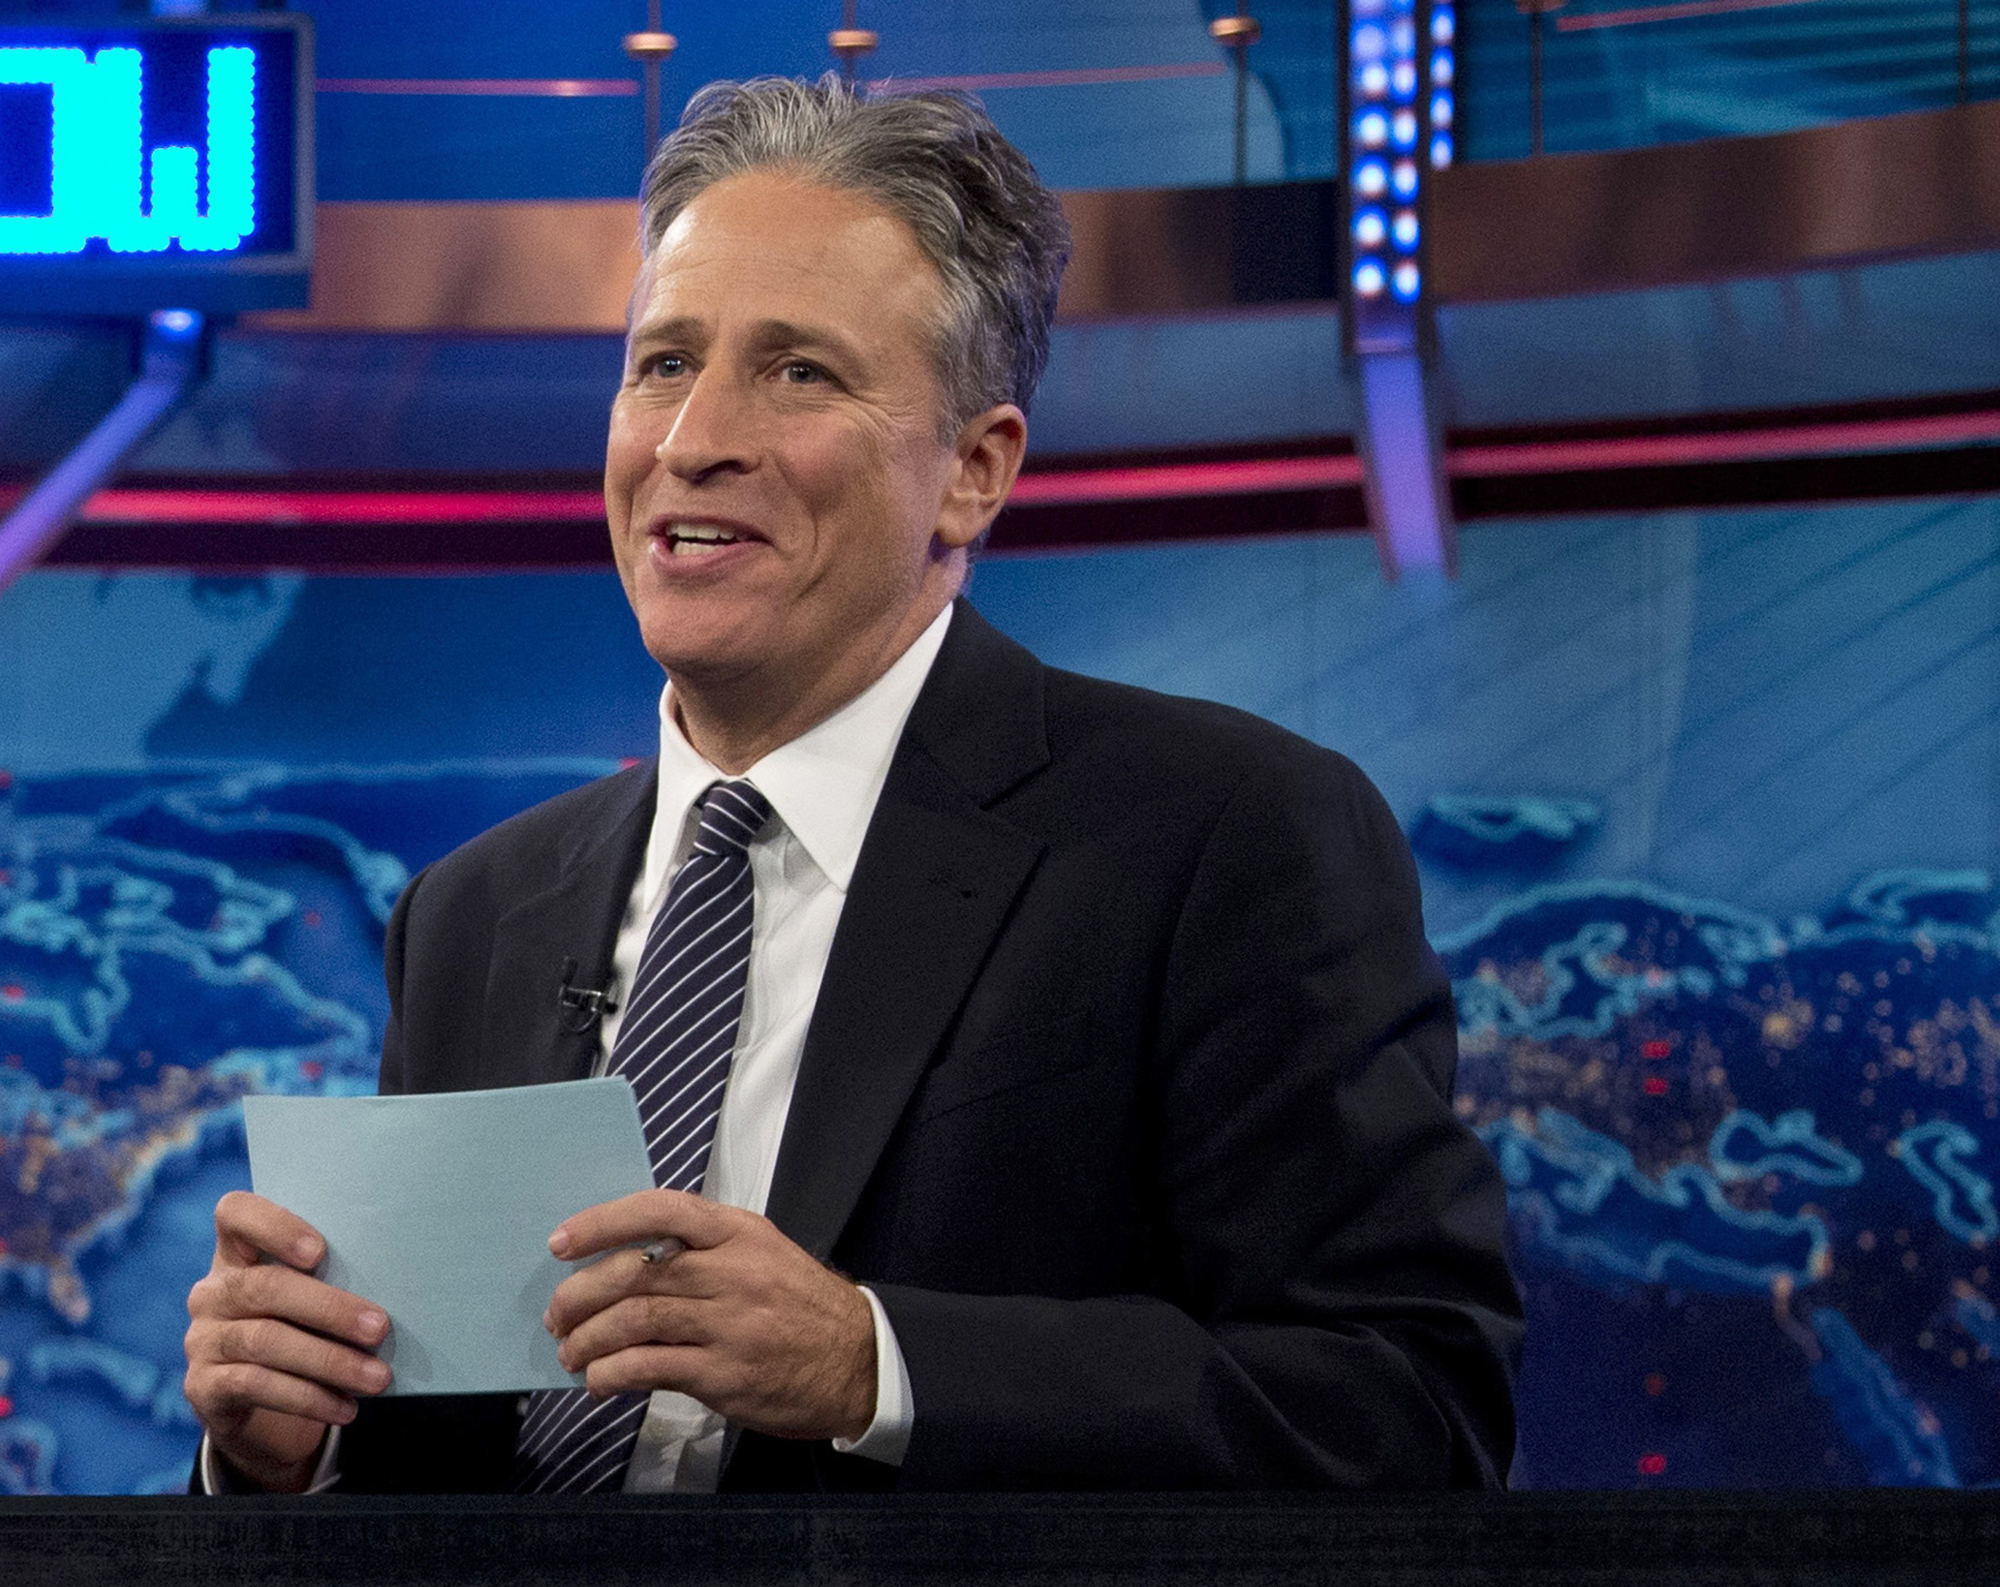 Jon Stewart speaks during a taping of "The Daily Show with John Stewart," in New York. in 2012.